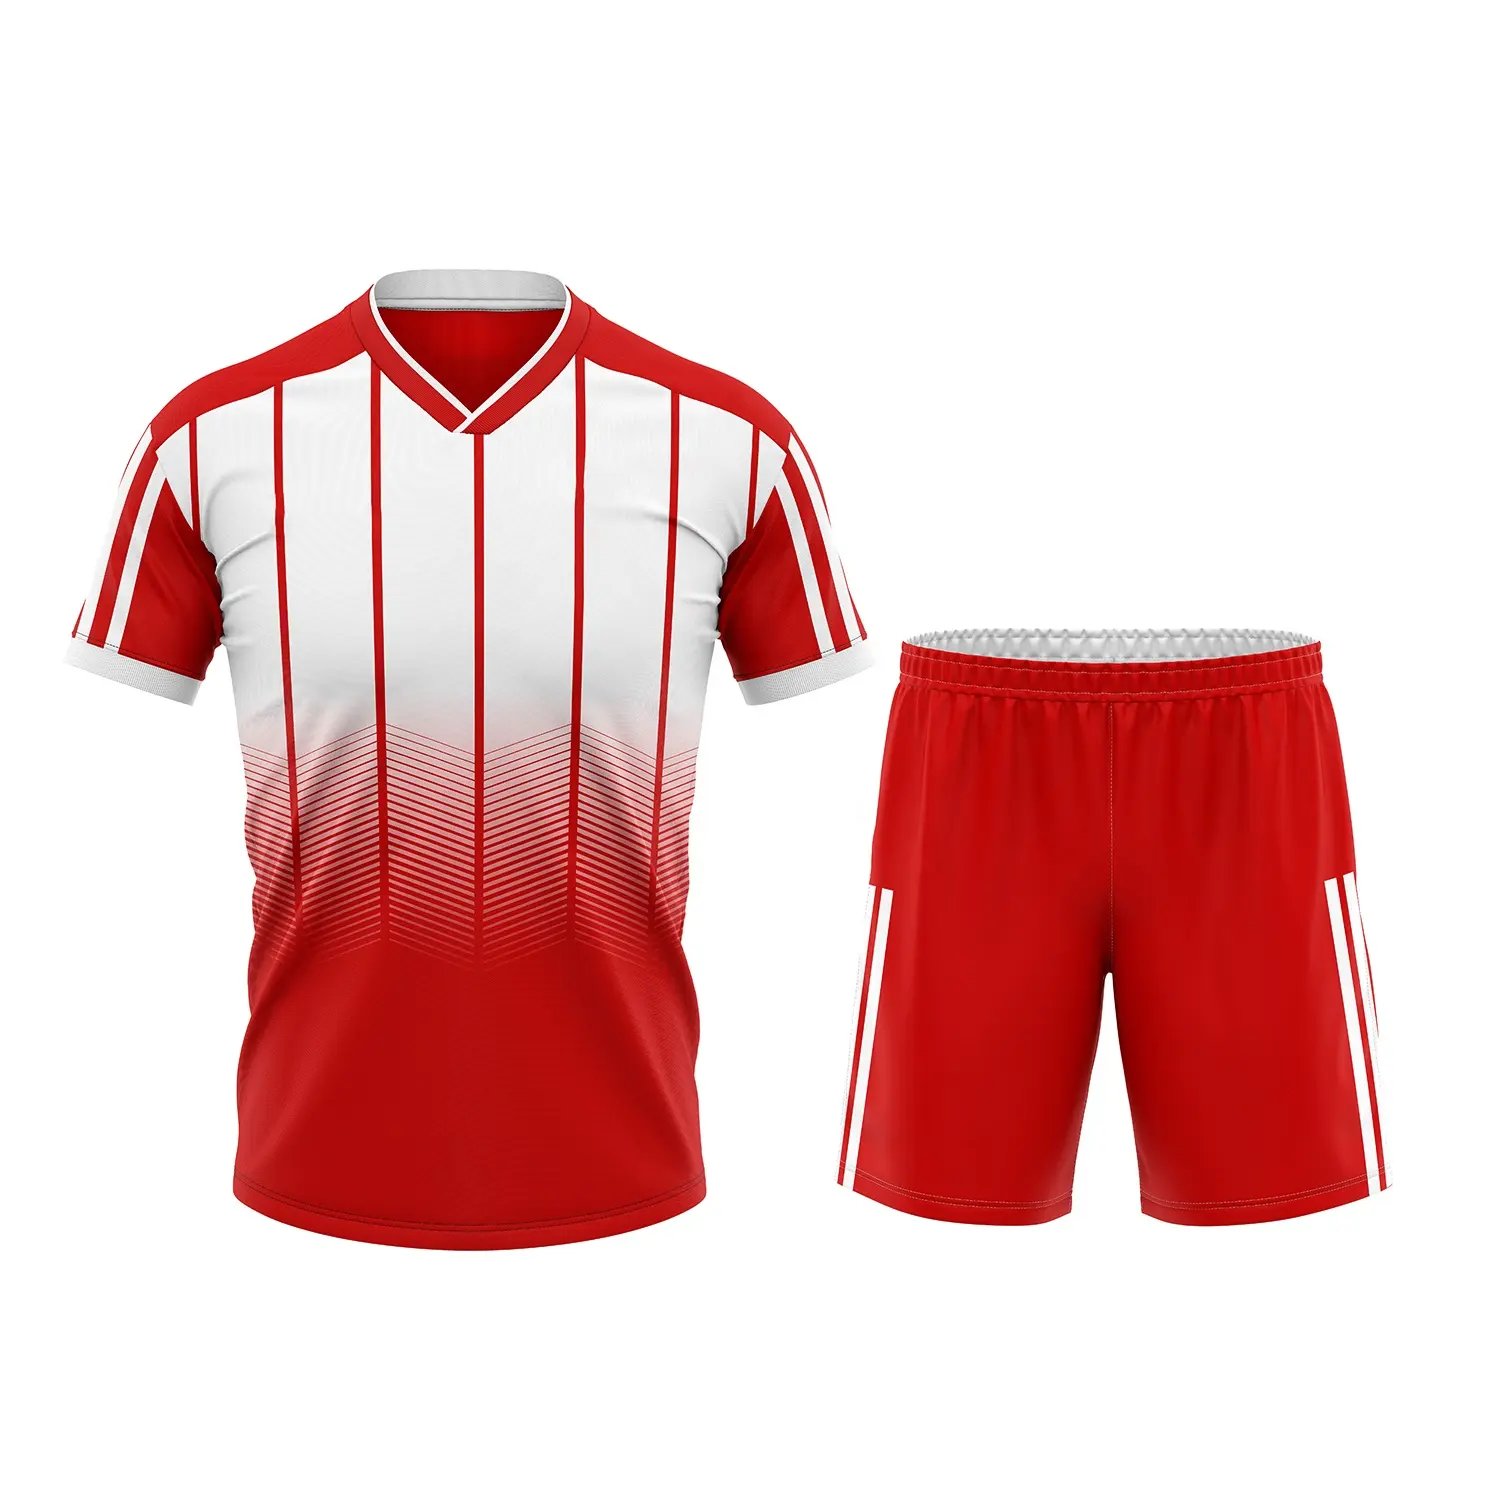 Neues Design Hot Selling Custom Sports Wear Rot-Weiß-Fußball-Sets Personal isiertes Design Polyester Sublimation Fußball uniform